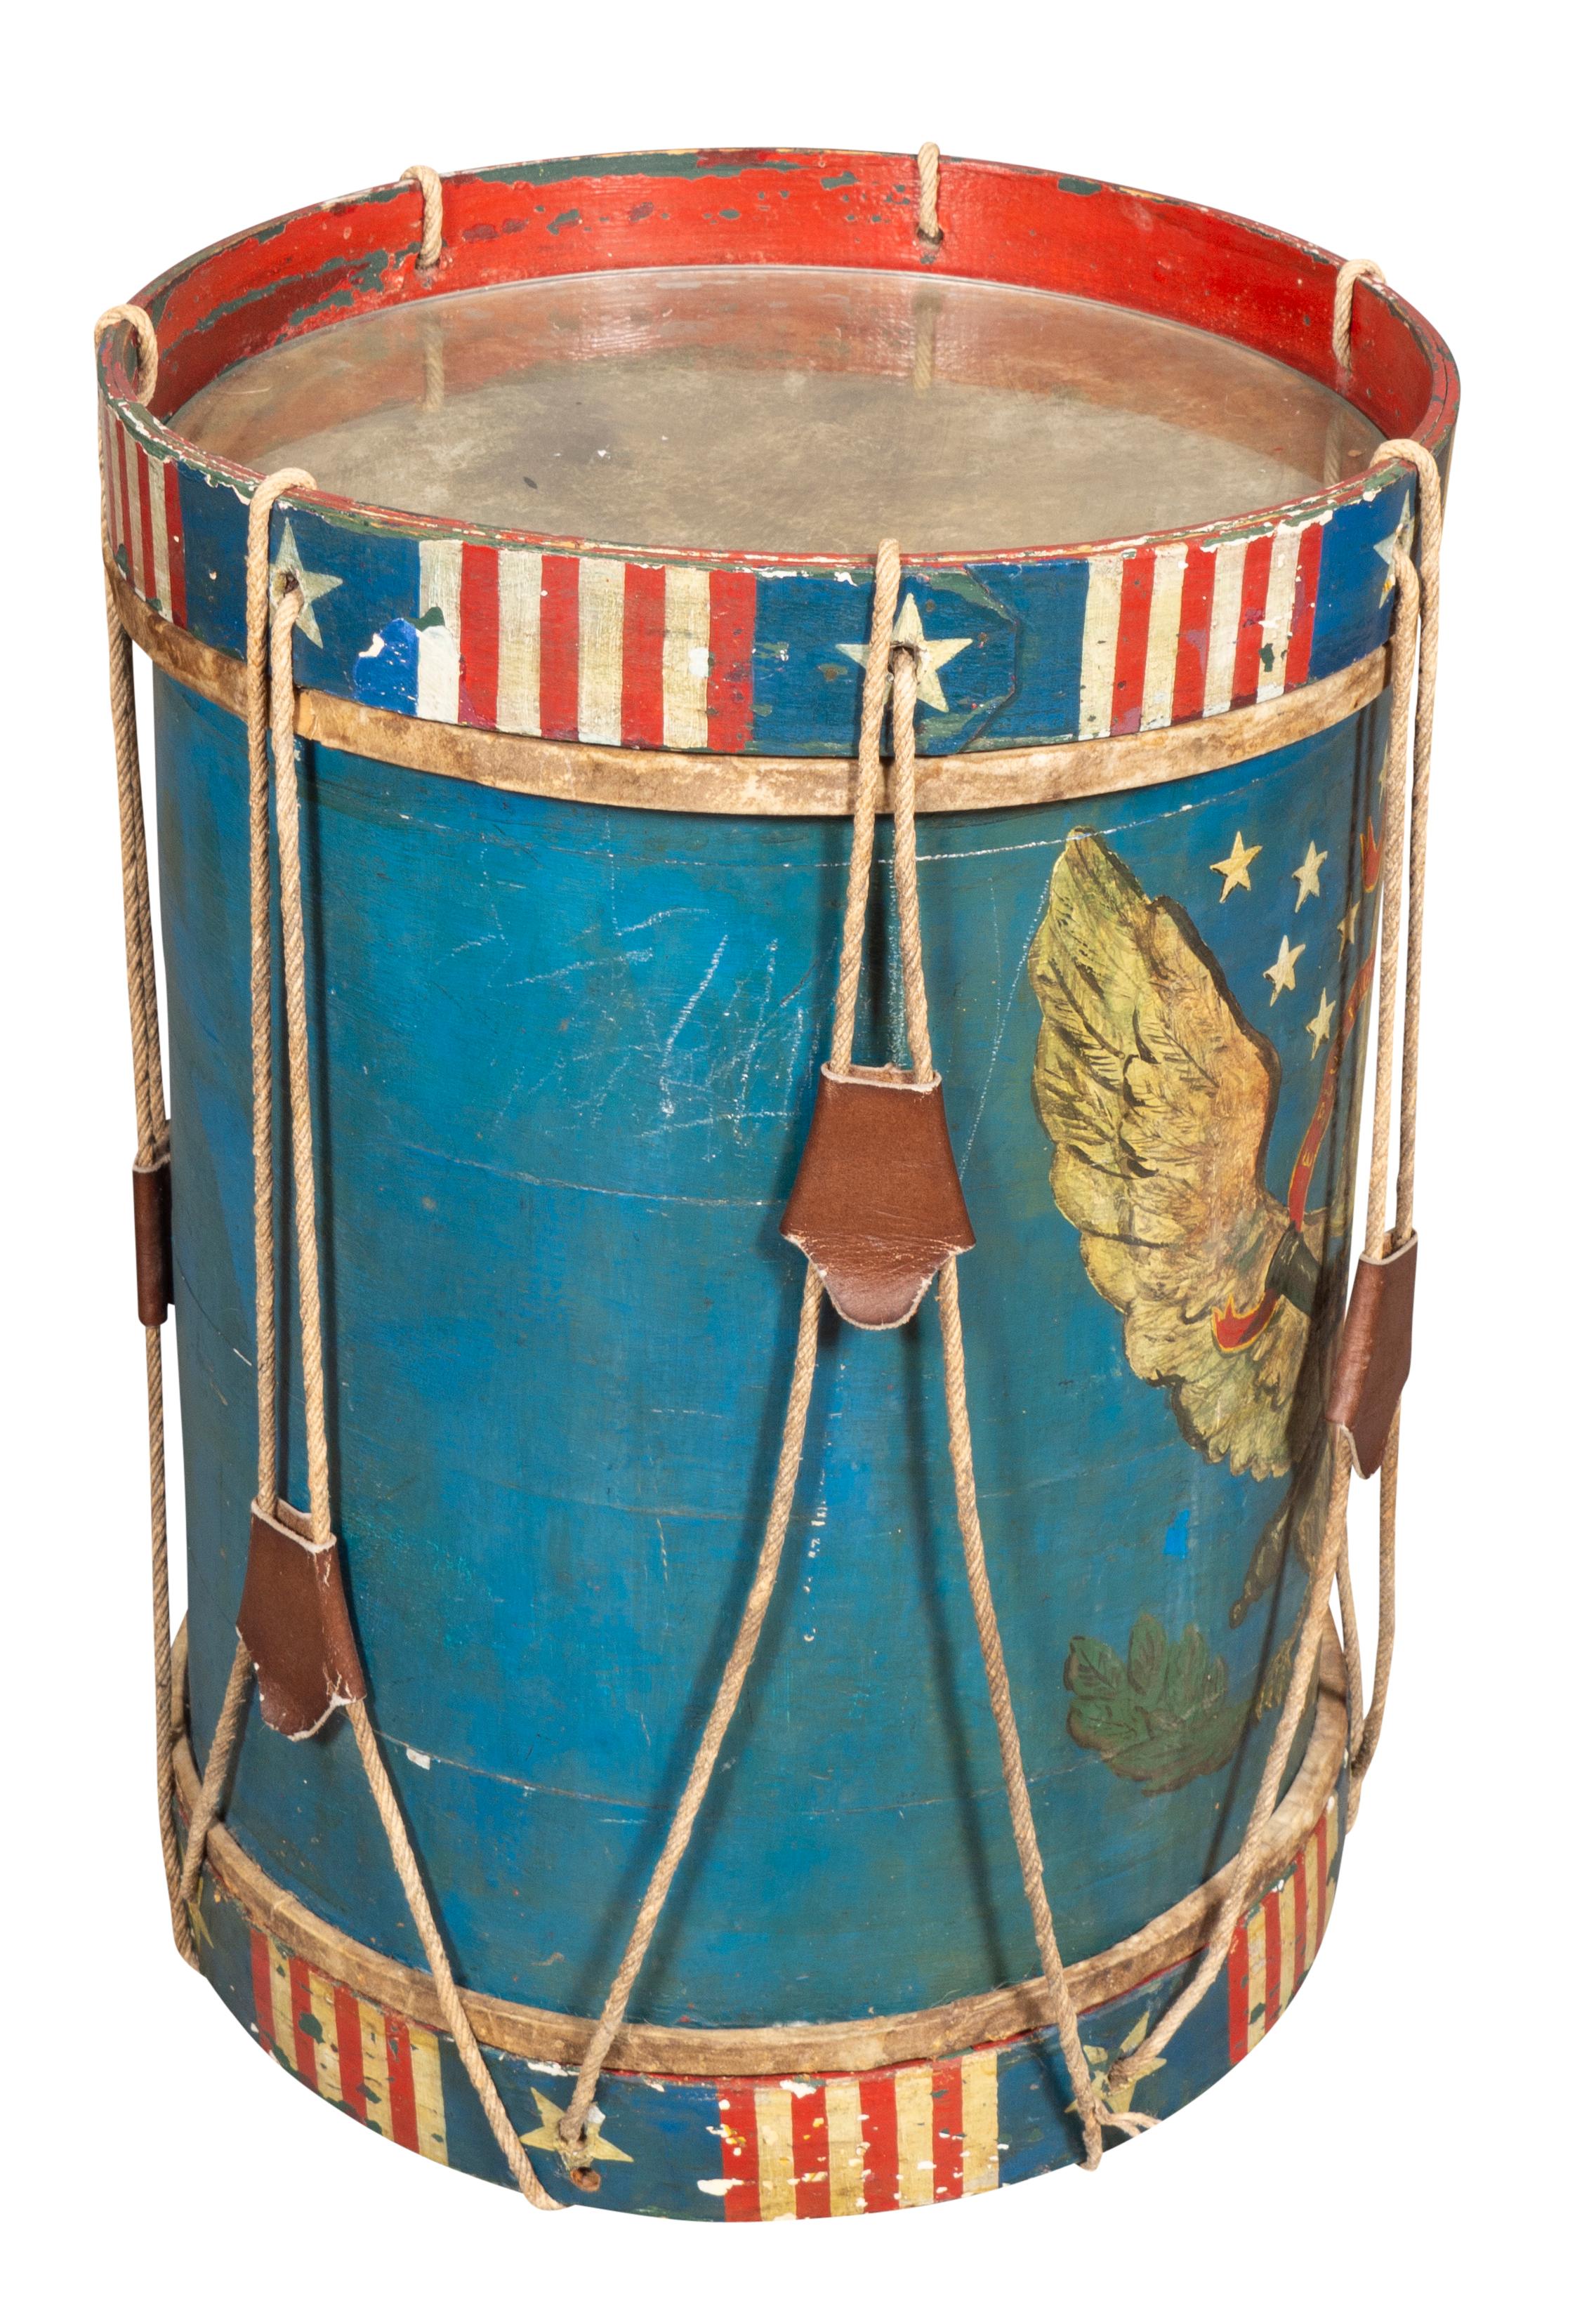 Cylindrical with a painted shield with thirteen stars with overall red,white and blue decoration. Vellum under glass top.